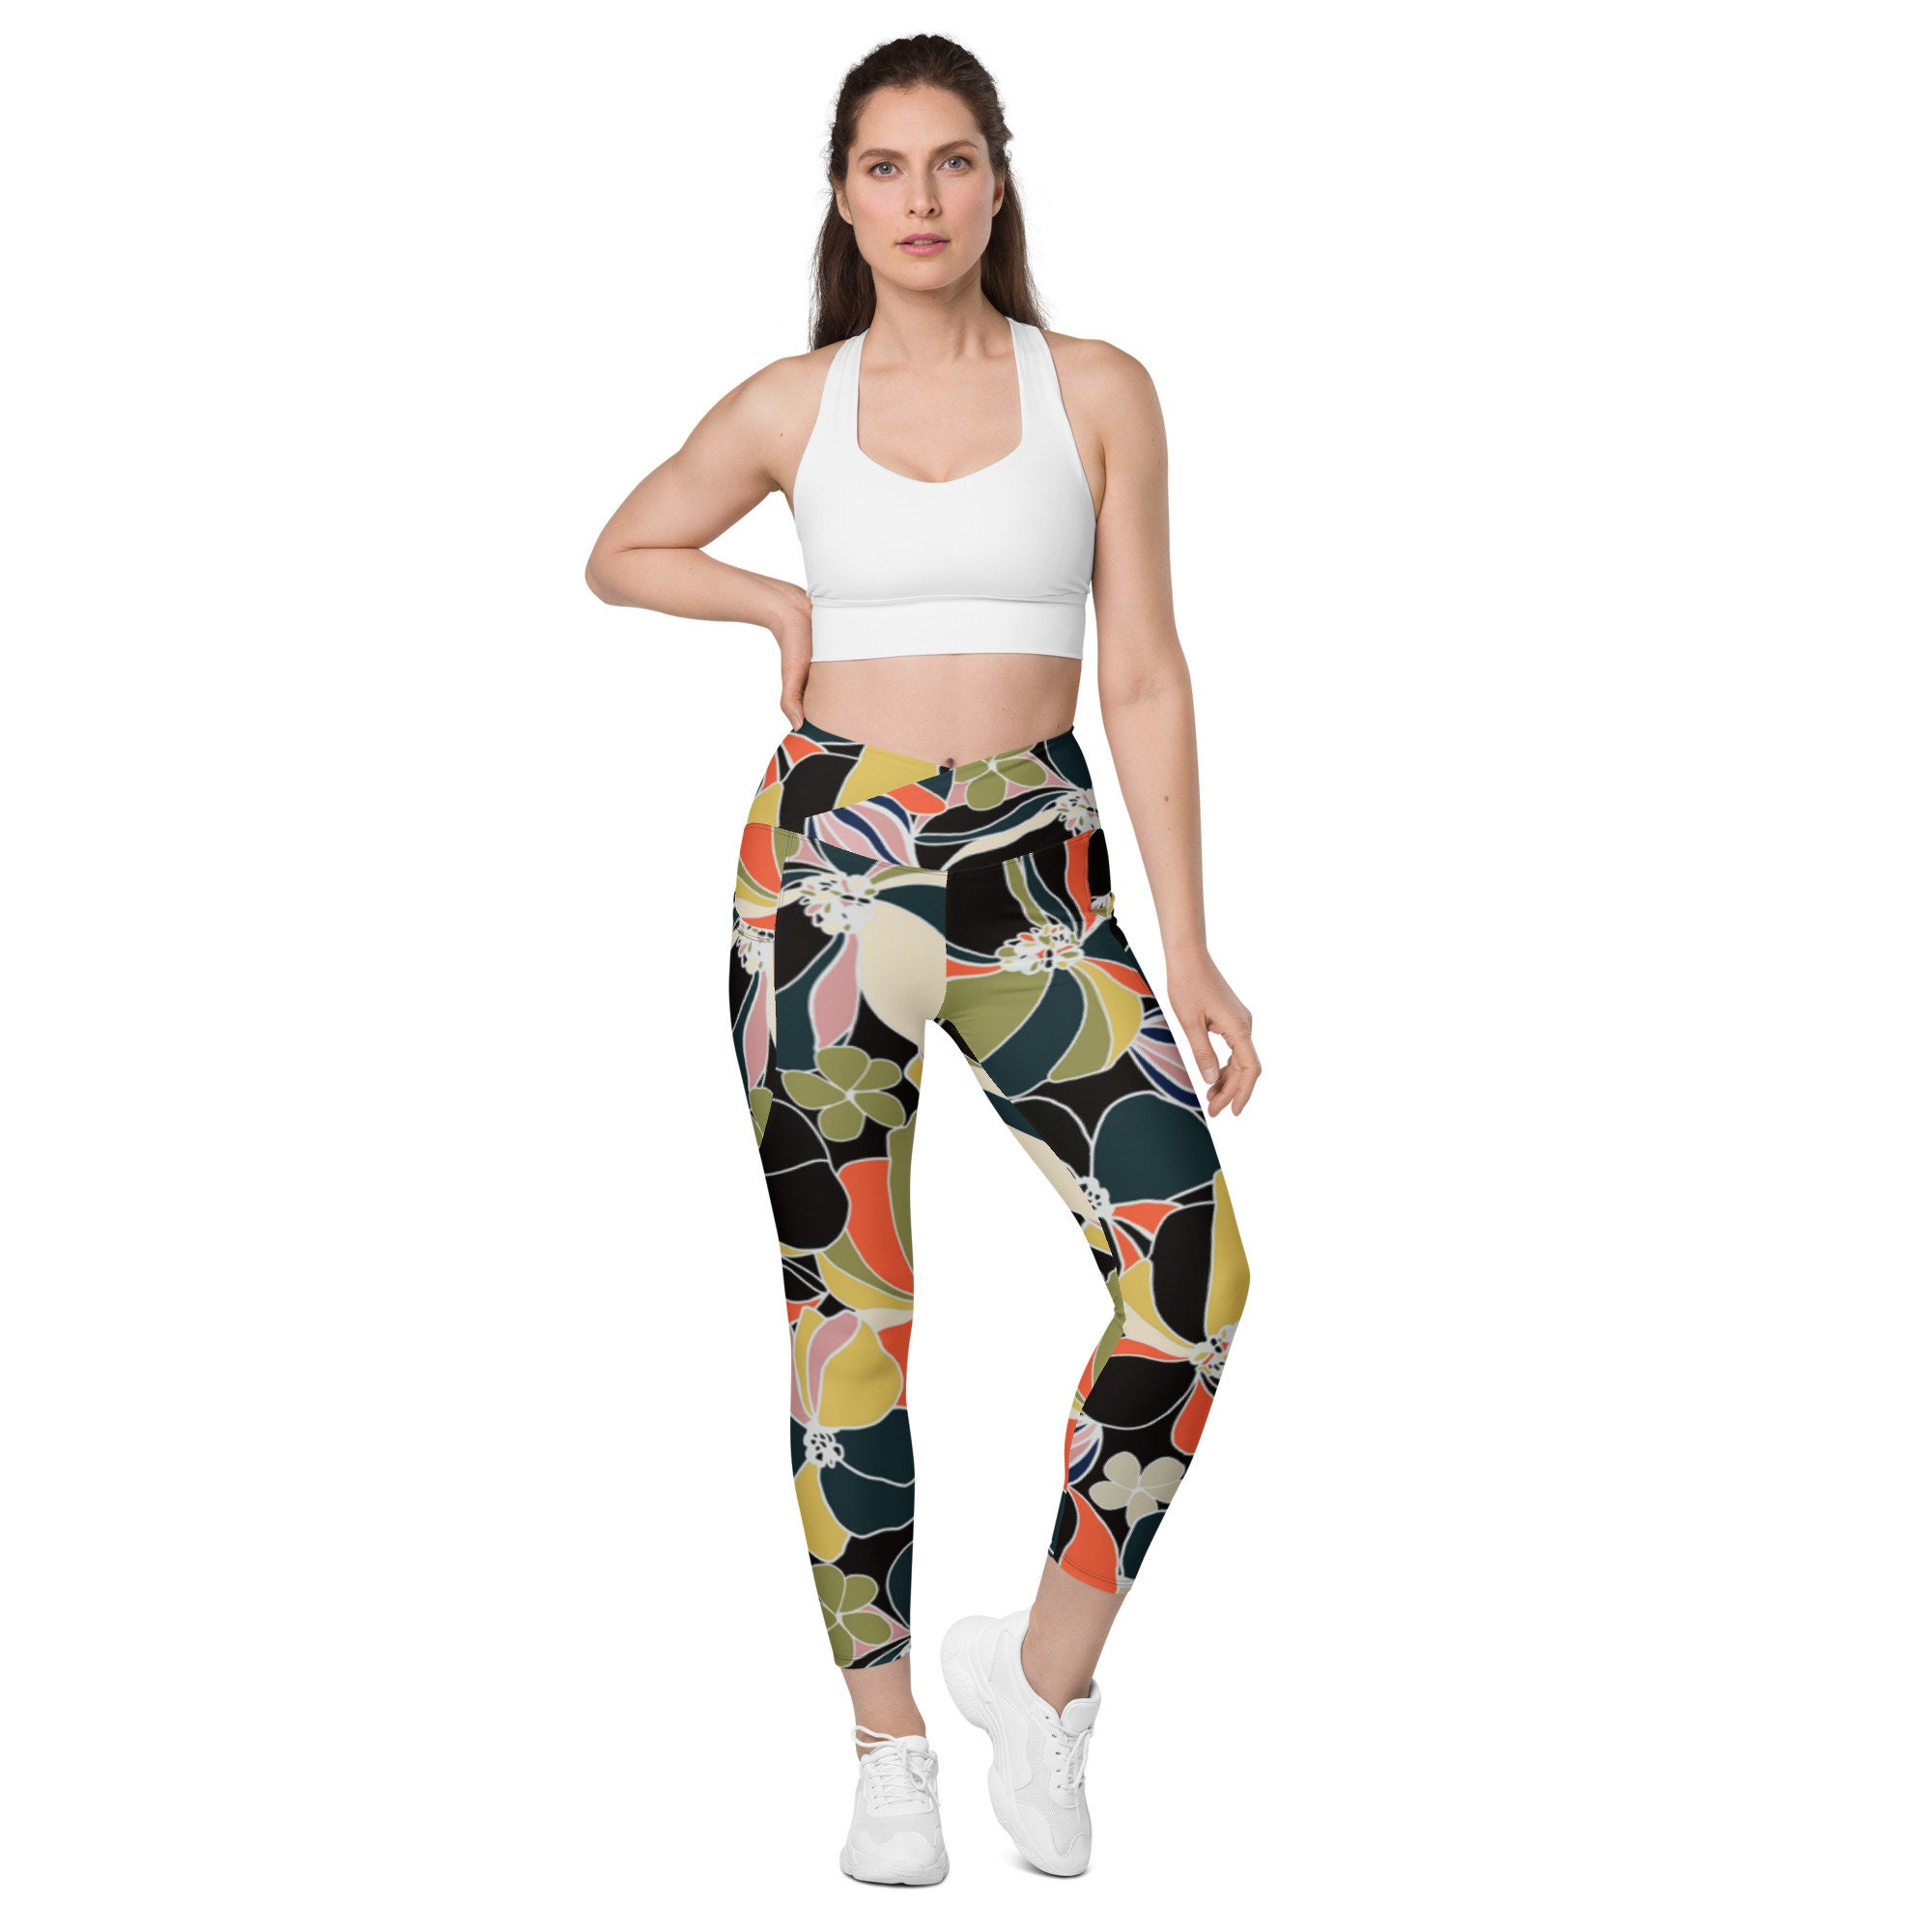 60's Inspired Crossover leggings with pockets